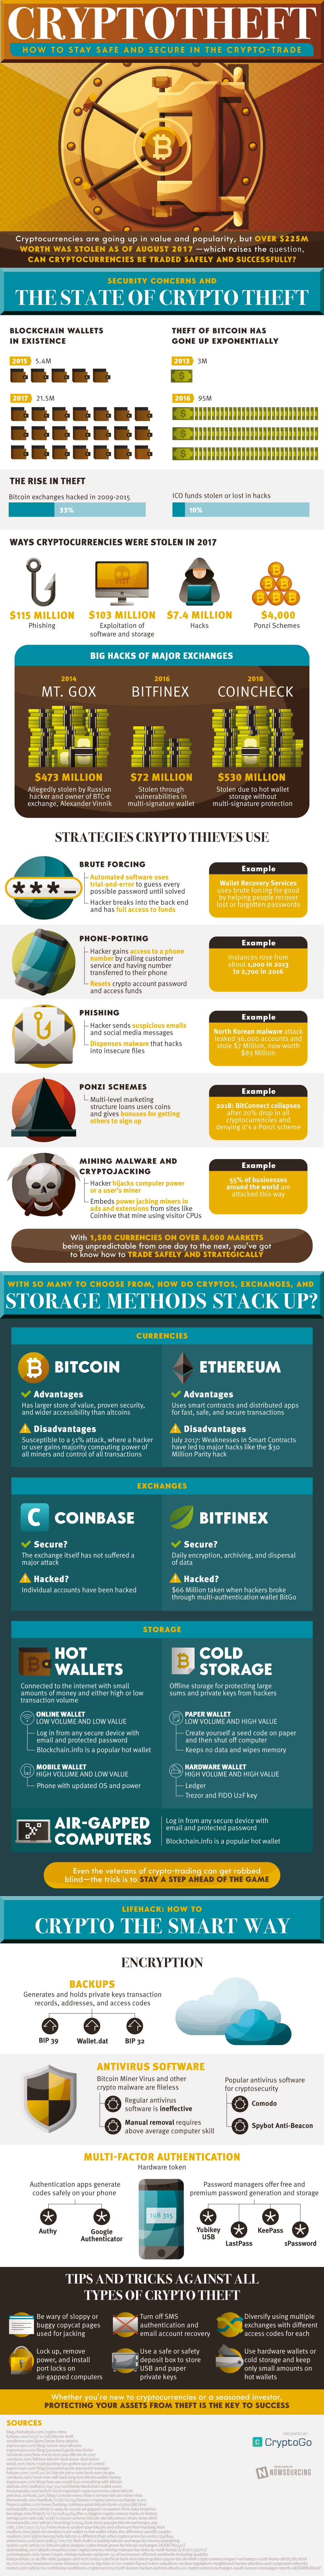 Infographic: The Problem of Crypto Theft, and How to Protect Yourself